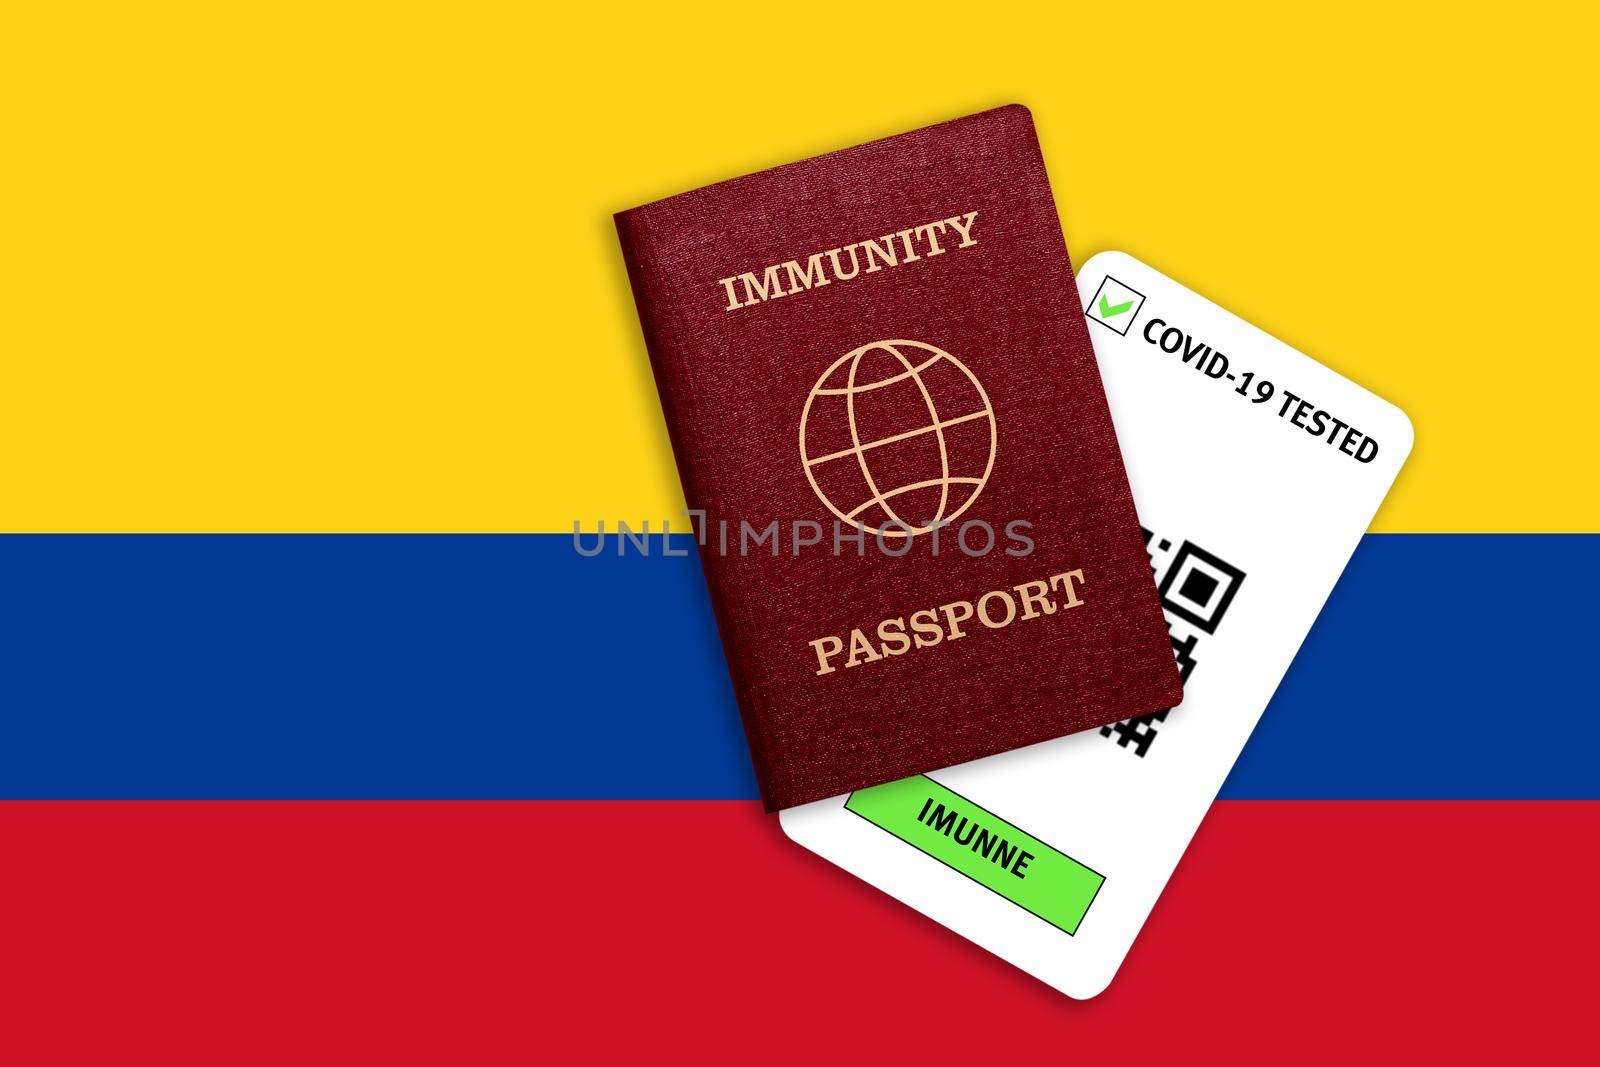 Immunity passport and test result for COVID-19 on flag of Colombia by galinasharapova